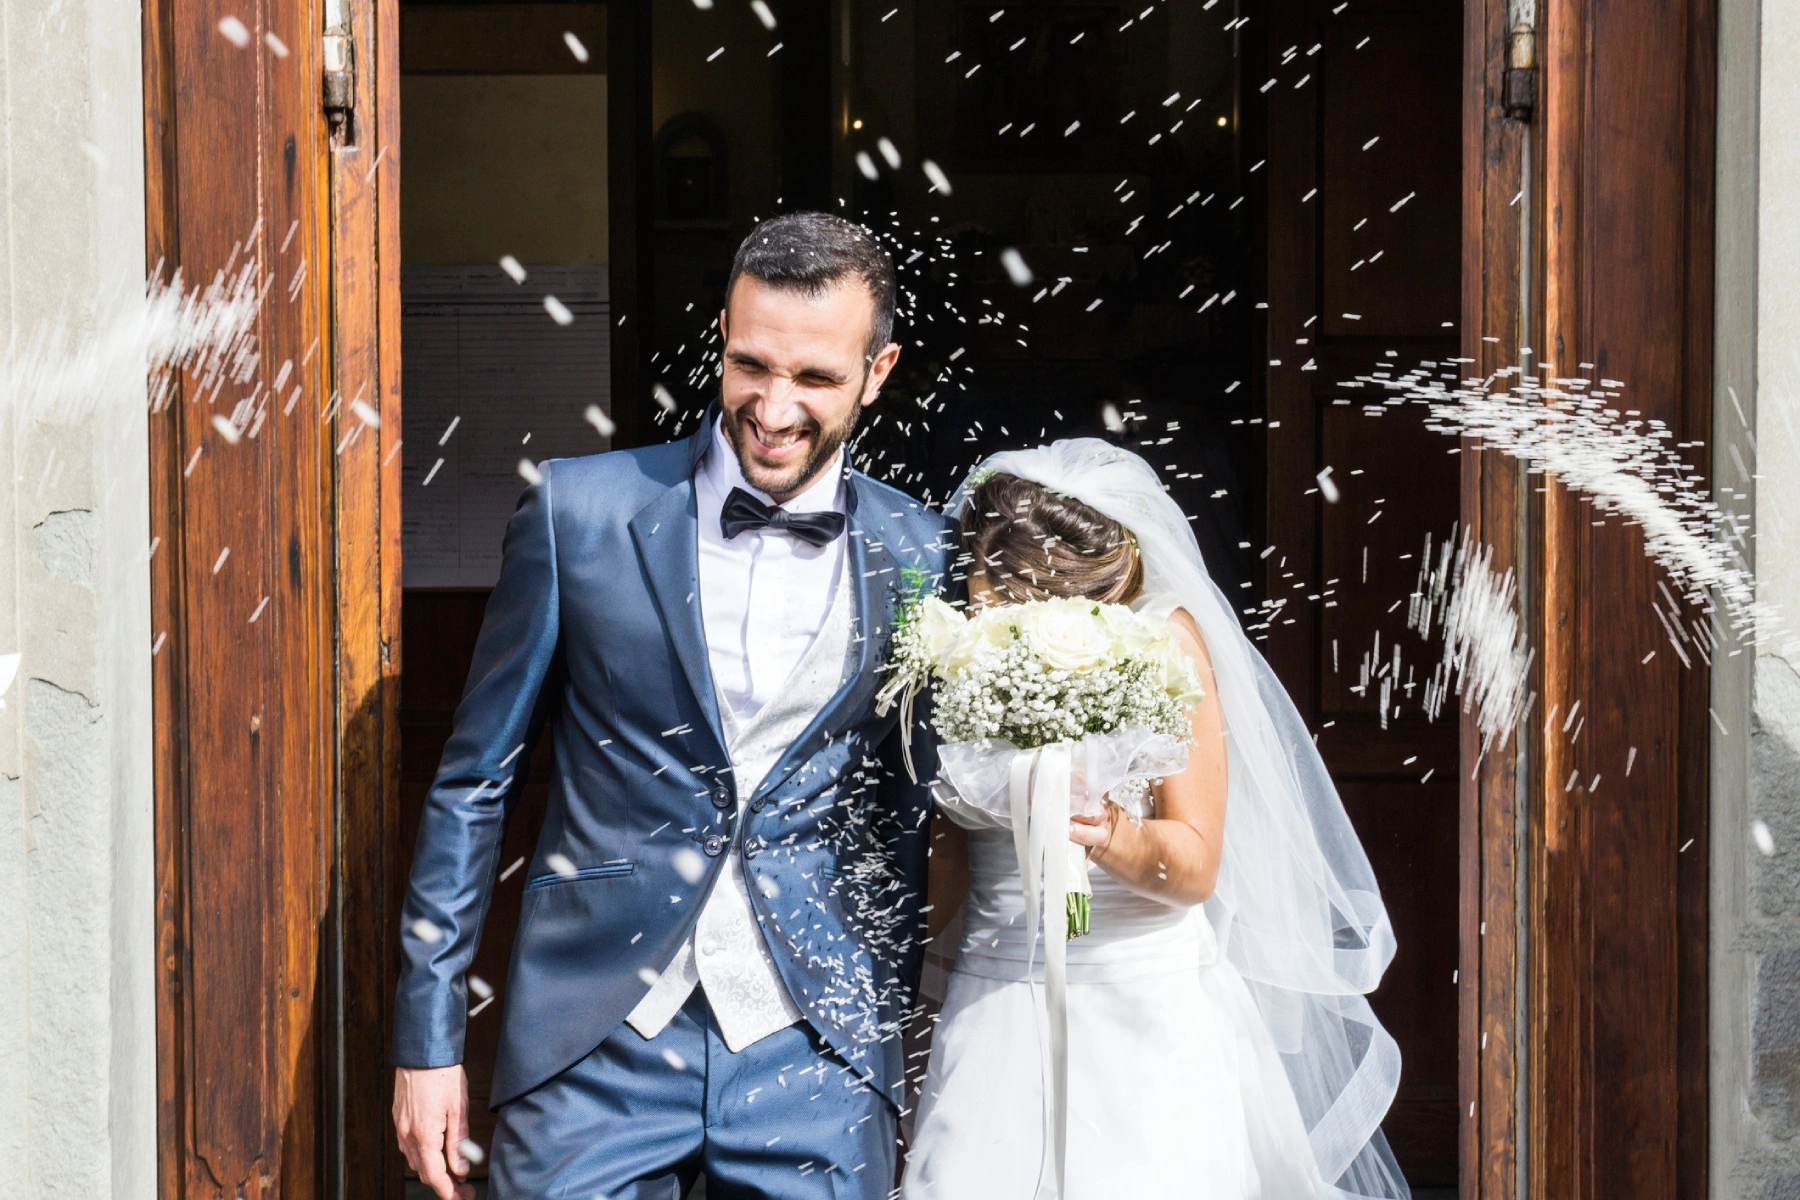 confetti being thrown on a happy newlywed couple as they exit a church